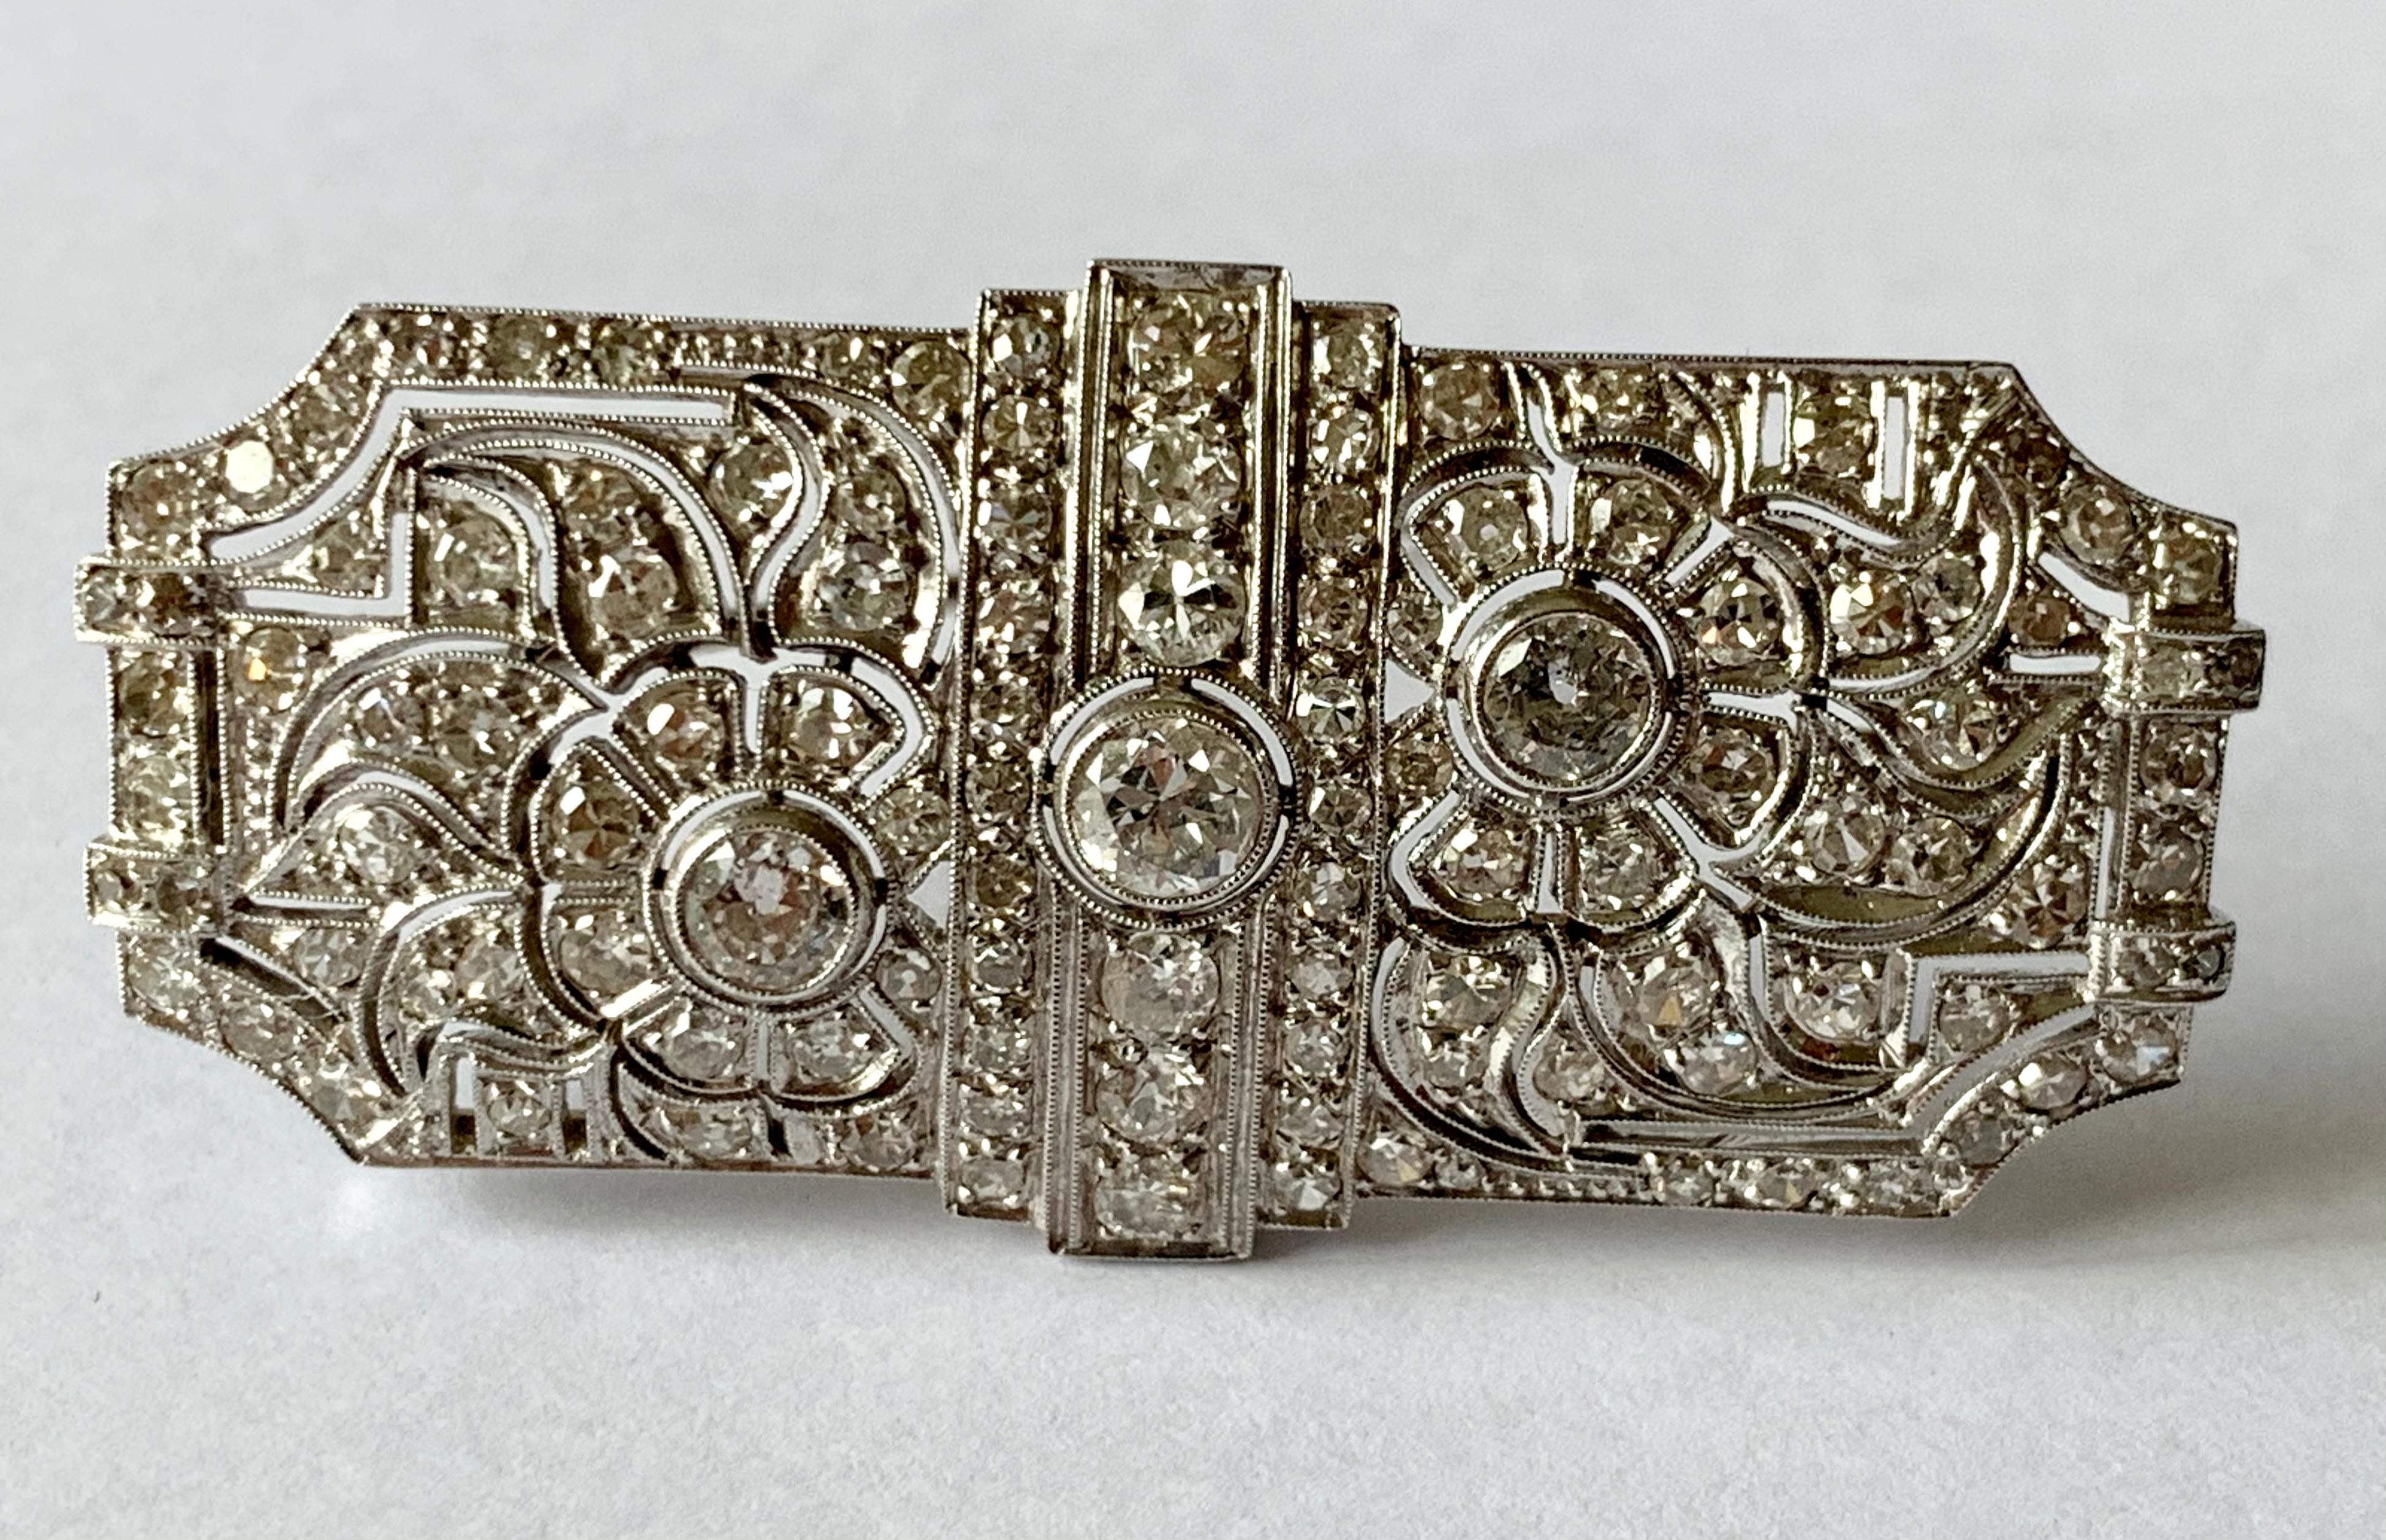 Elegant Platinum brooch set with Diamonds of approximately 4.50 ct. Plaque brooches were very typical for the 1930s. Rectangular shape, elongated octagonal motifs of openwork, geometrical design. Filigree and migraine work. 
Lngth: 5.1 cm, width: